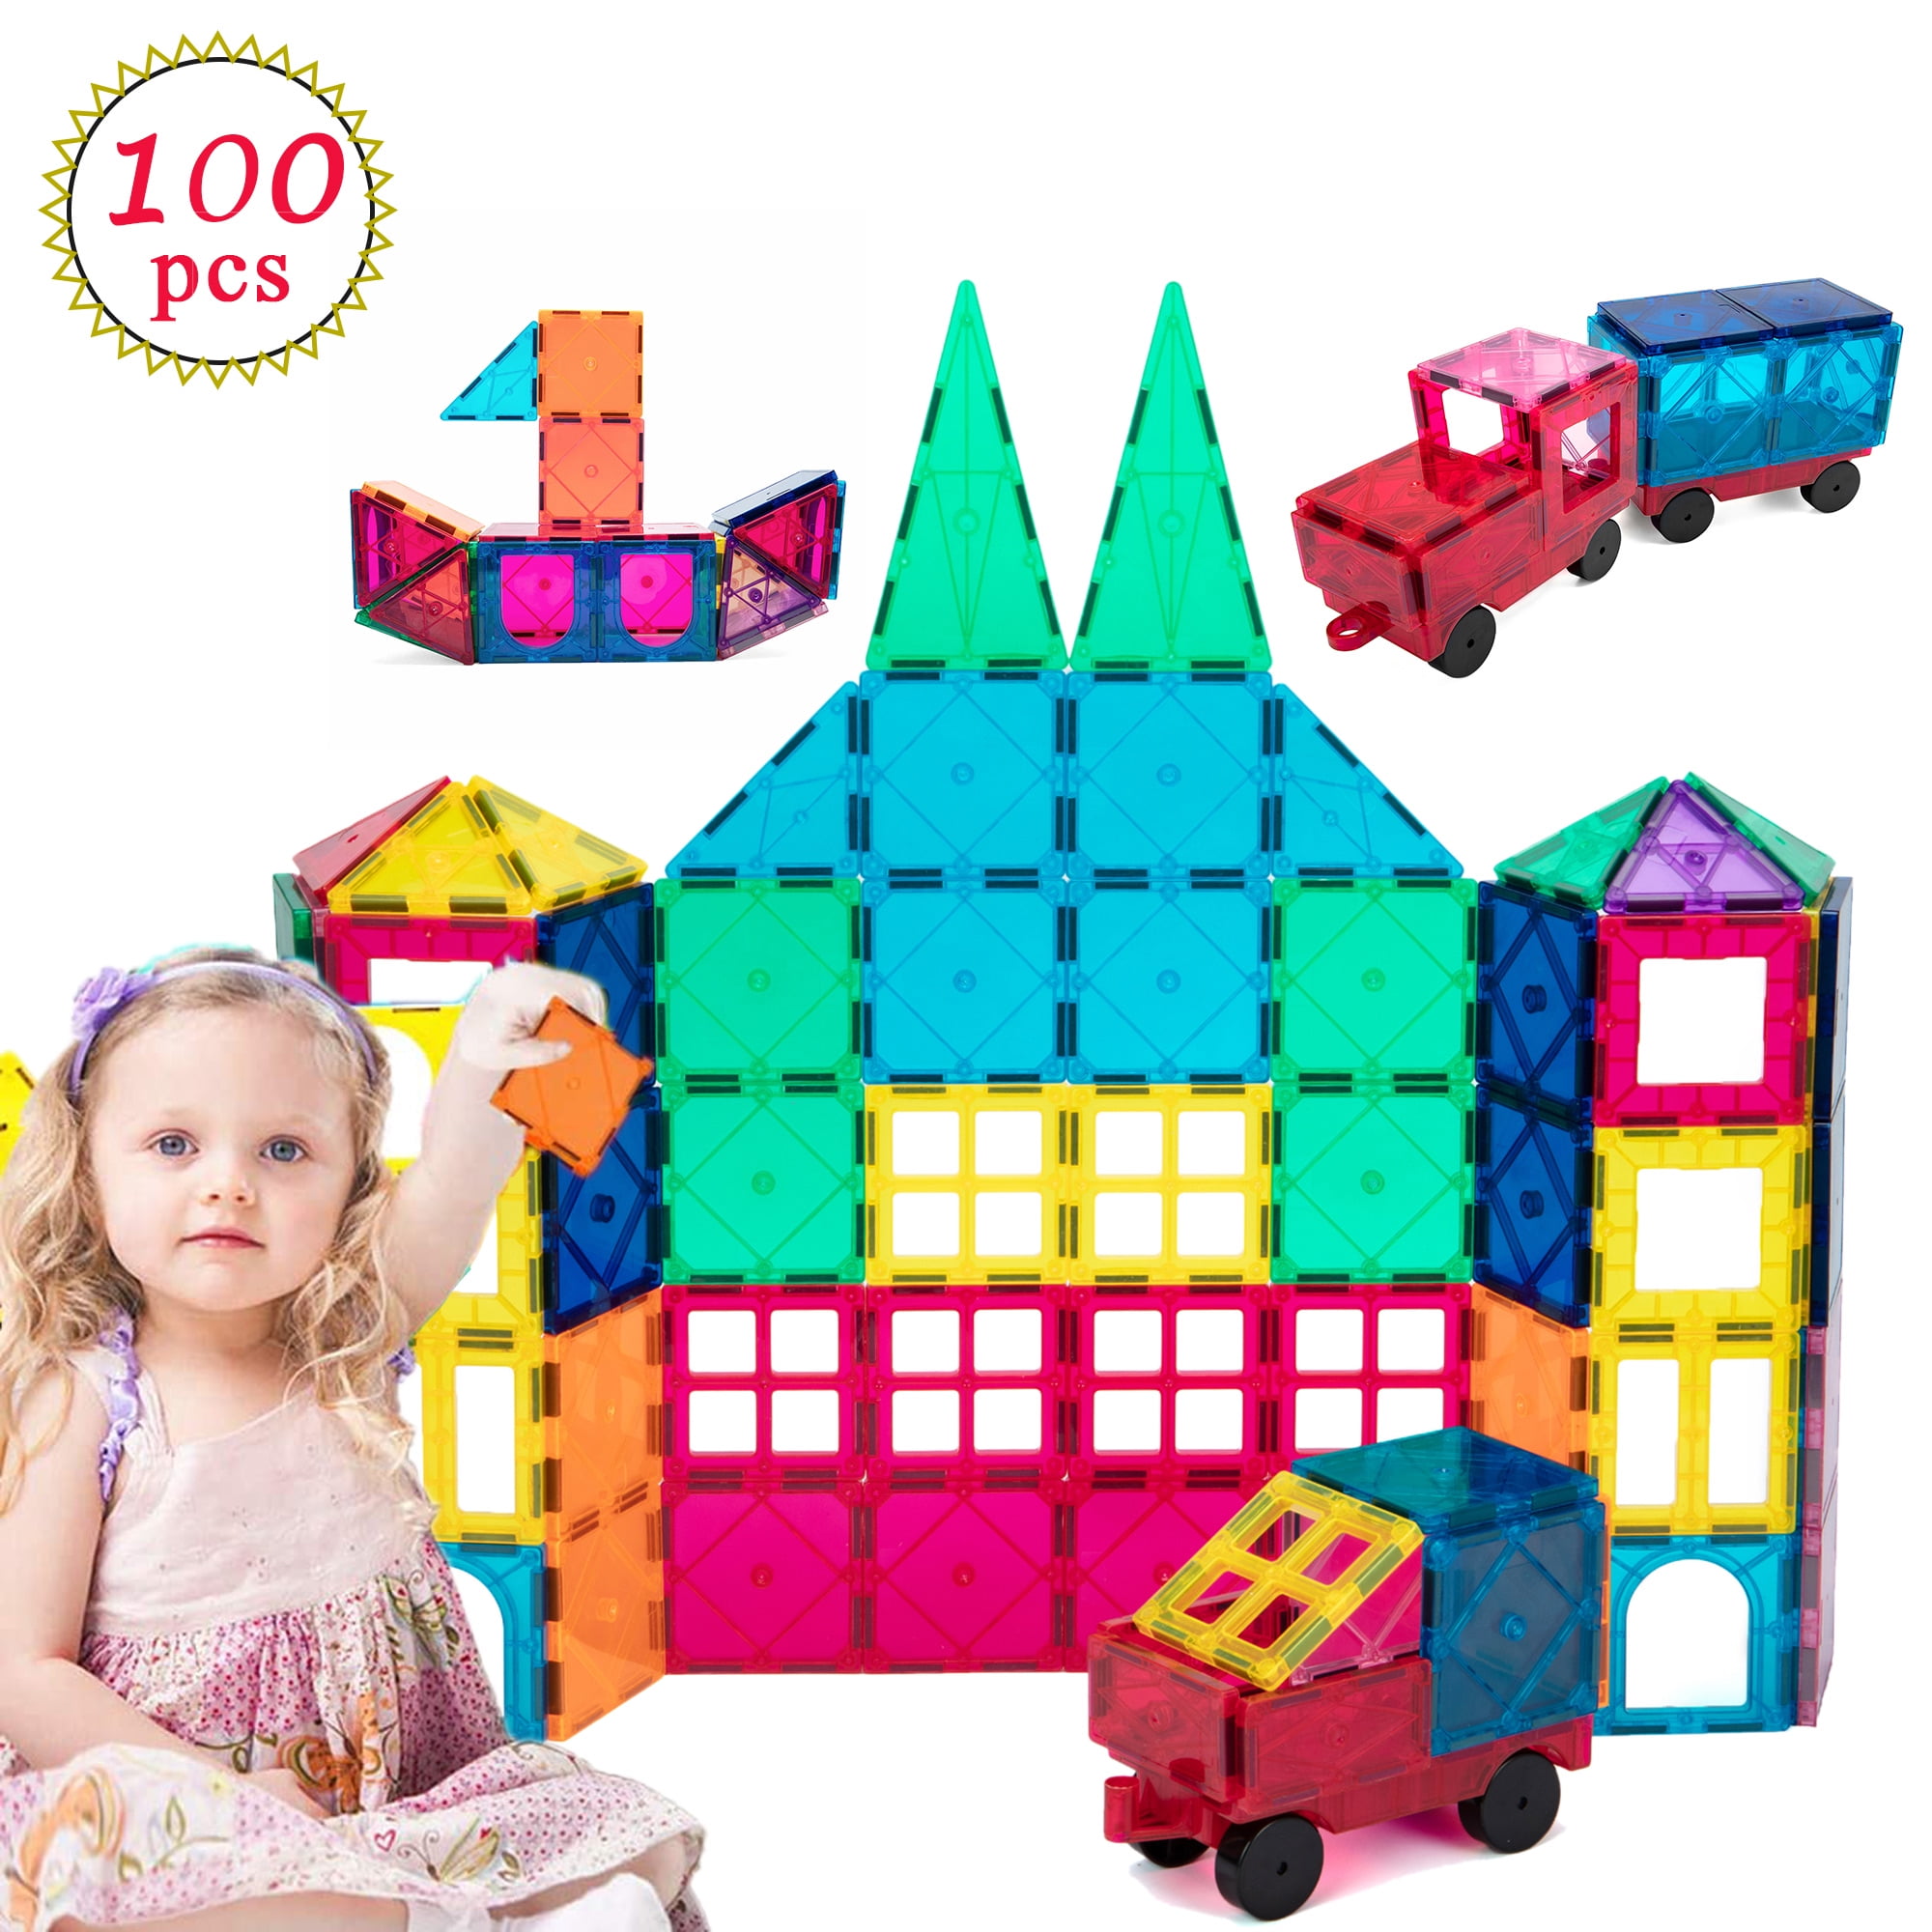 Magnetic Tiles Building Blocks STEM Magnet Blocks Toys for 3 Year Old Boys and Girls,Educational Toy Gifts for Toddlers Kids Develop Children's Ability to Observe,Imagine,Practice.